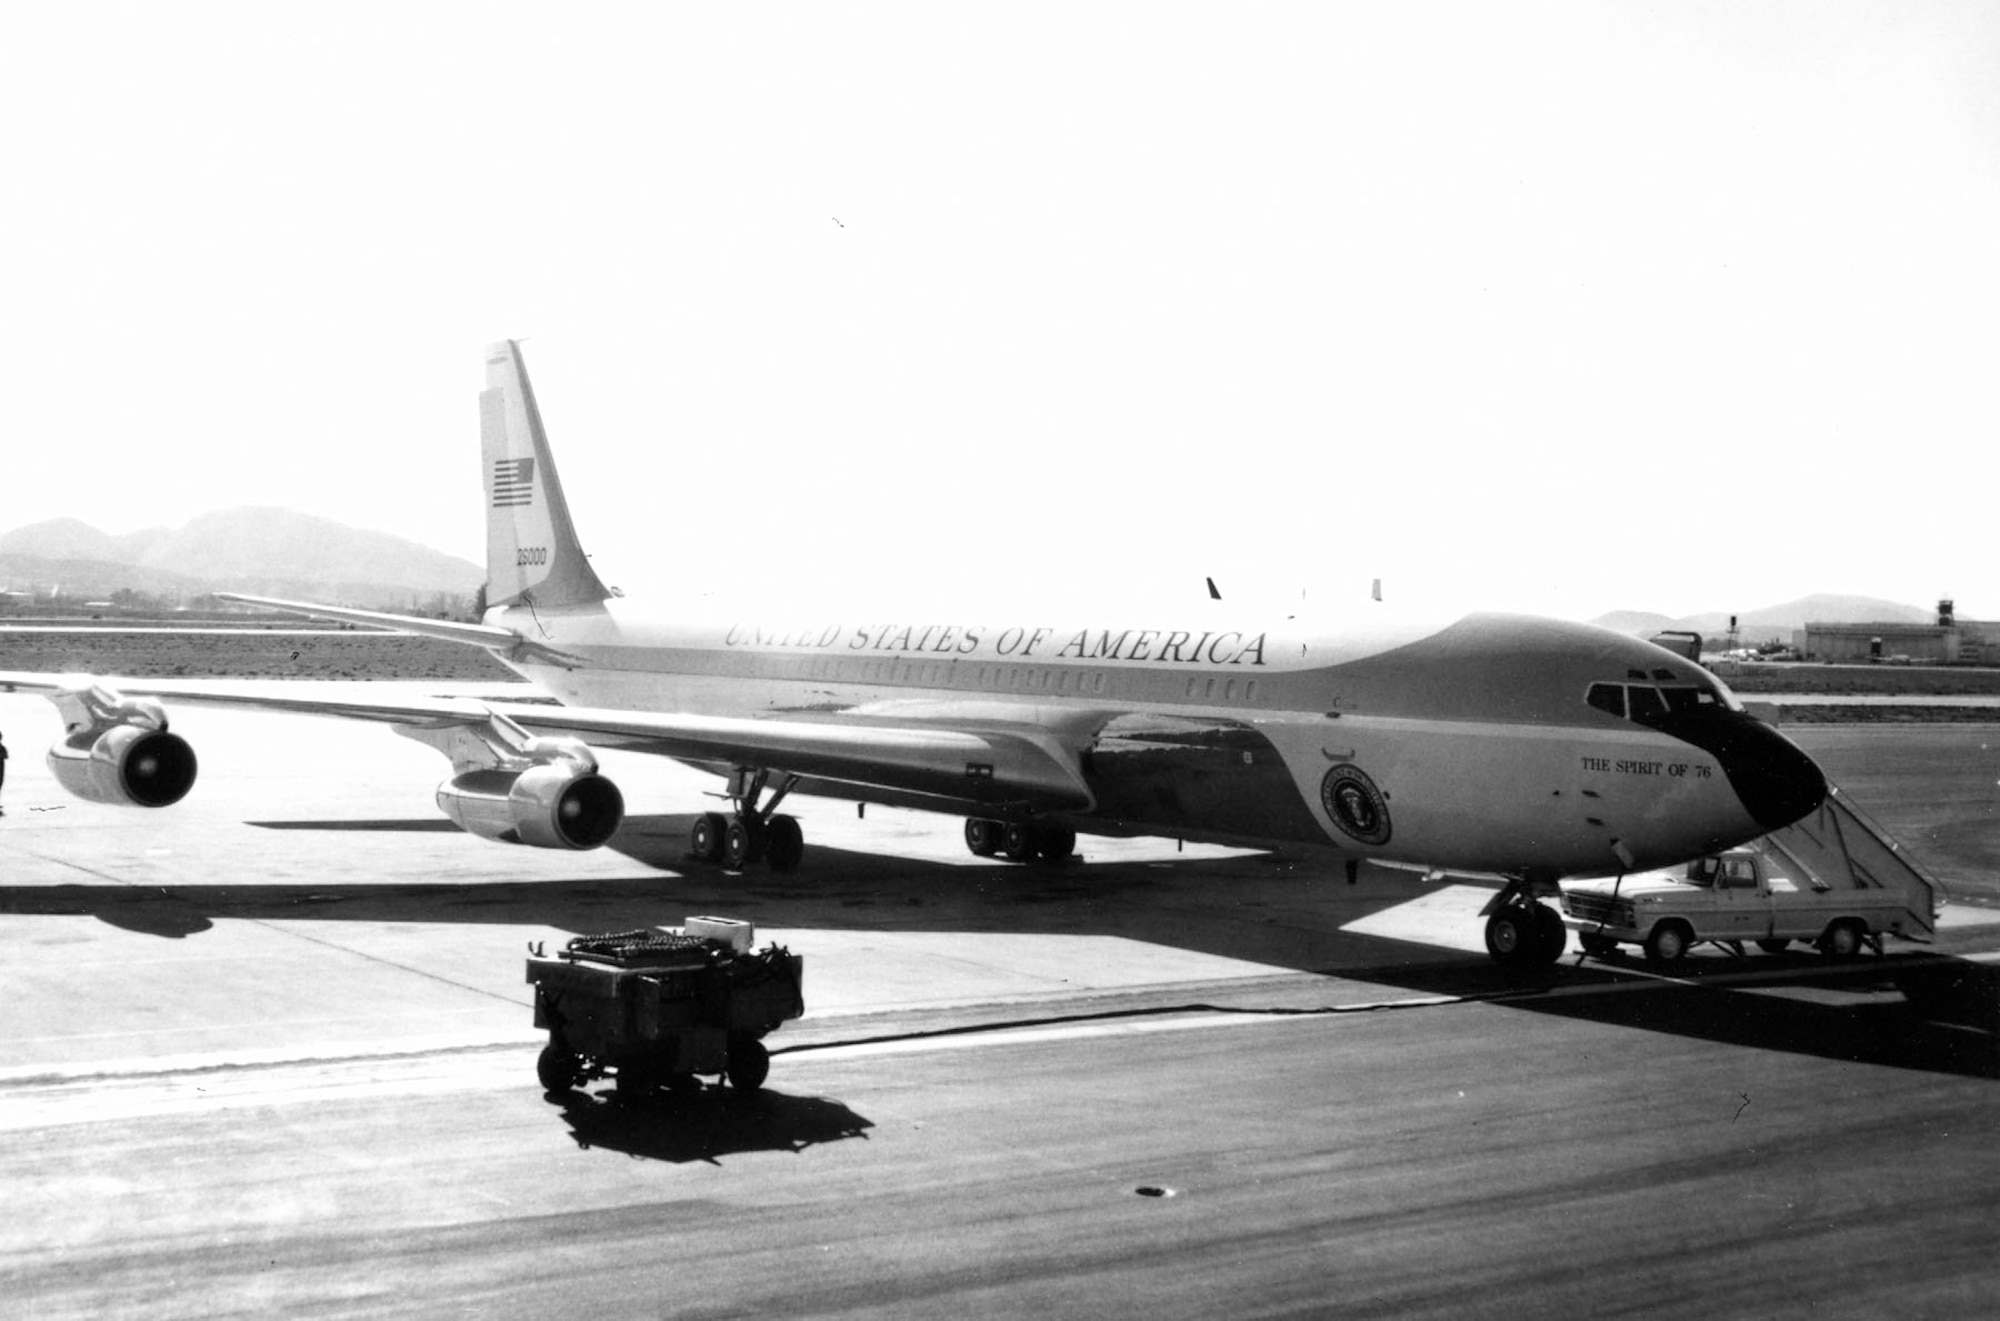 Boeing VC-137C SAM 26000 (Air Force One) with "The Spirit of 76" painted on the nose. (U.S. Air Force photo)